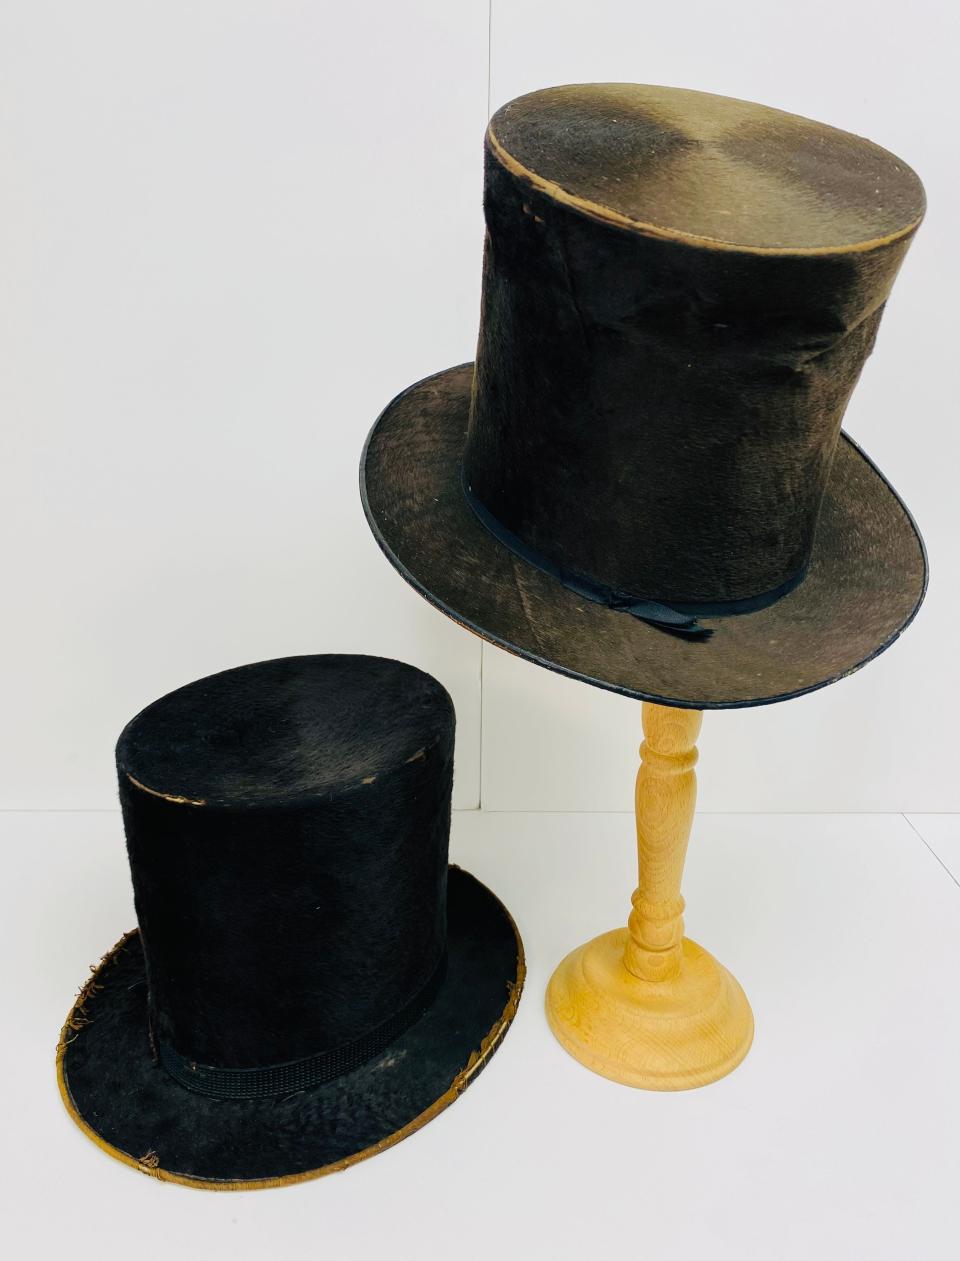 Two top hats circa 1850s in the Washington County Historical Society's collection, including an A.J. Downey top hat, left and an Updegraff & Co. top hat, right.